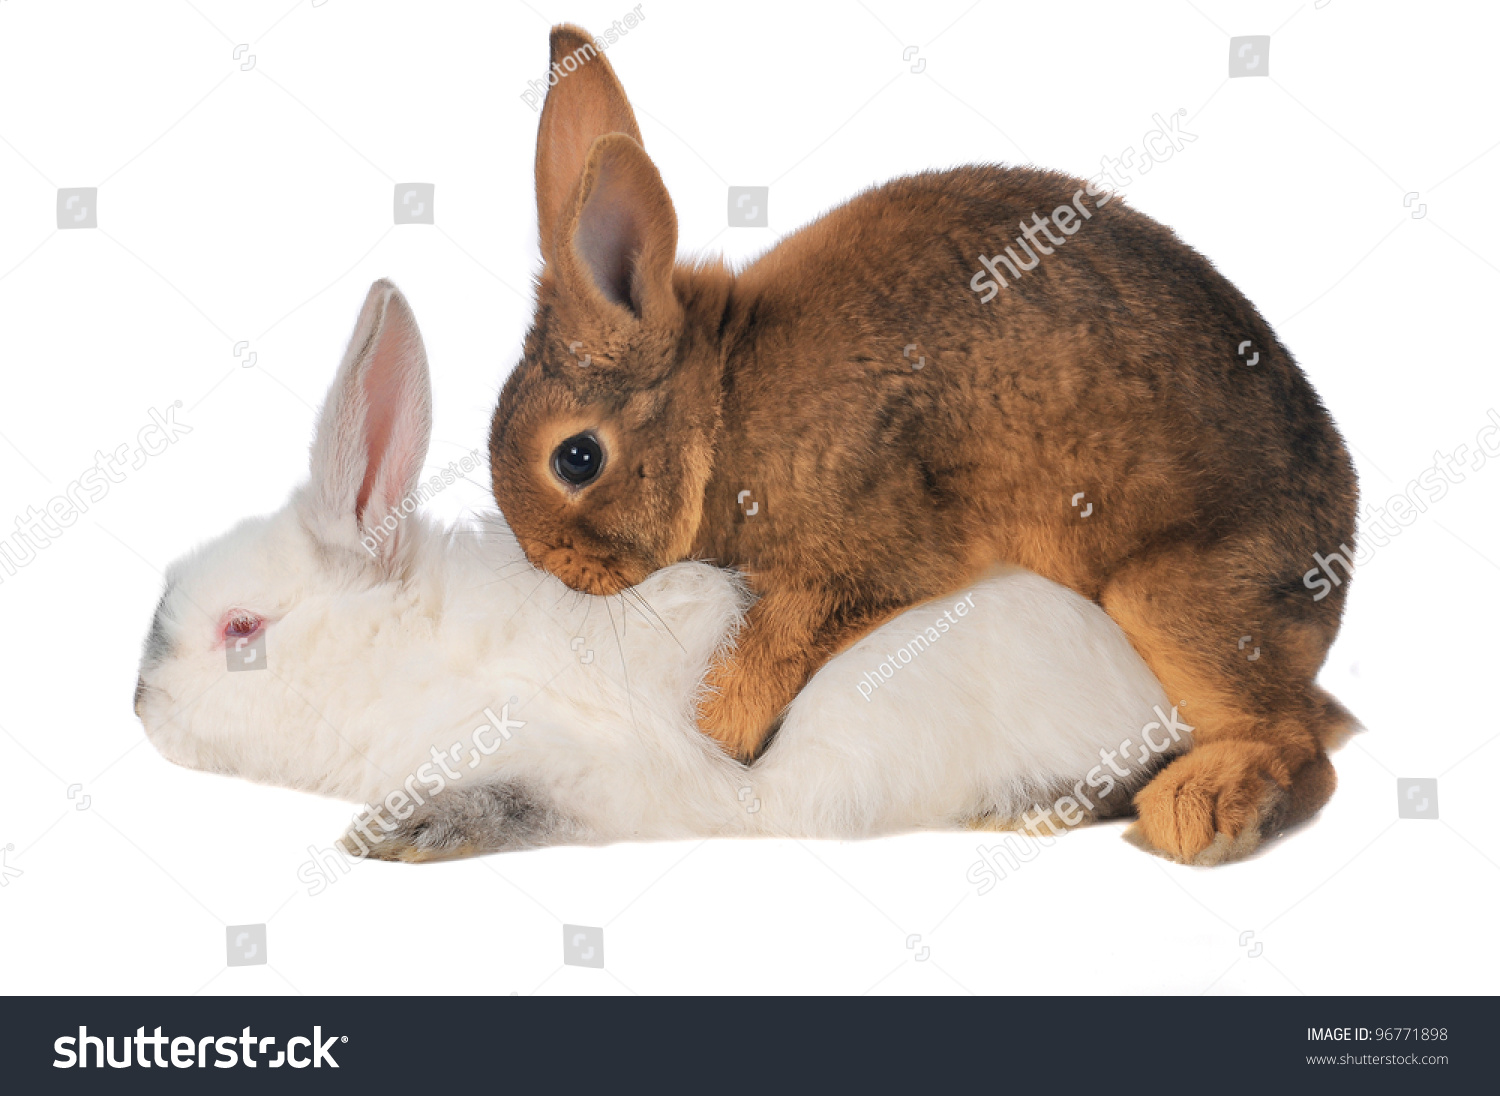 How To Sex A Rabbit 81